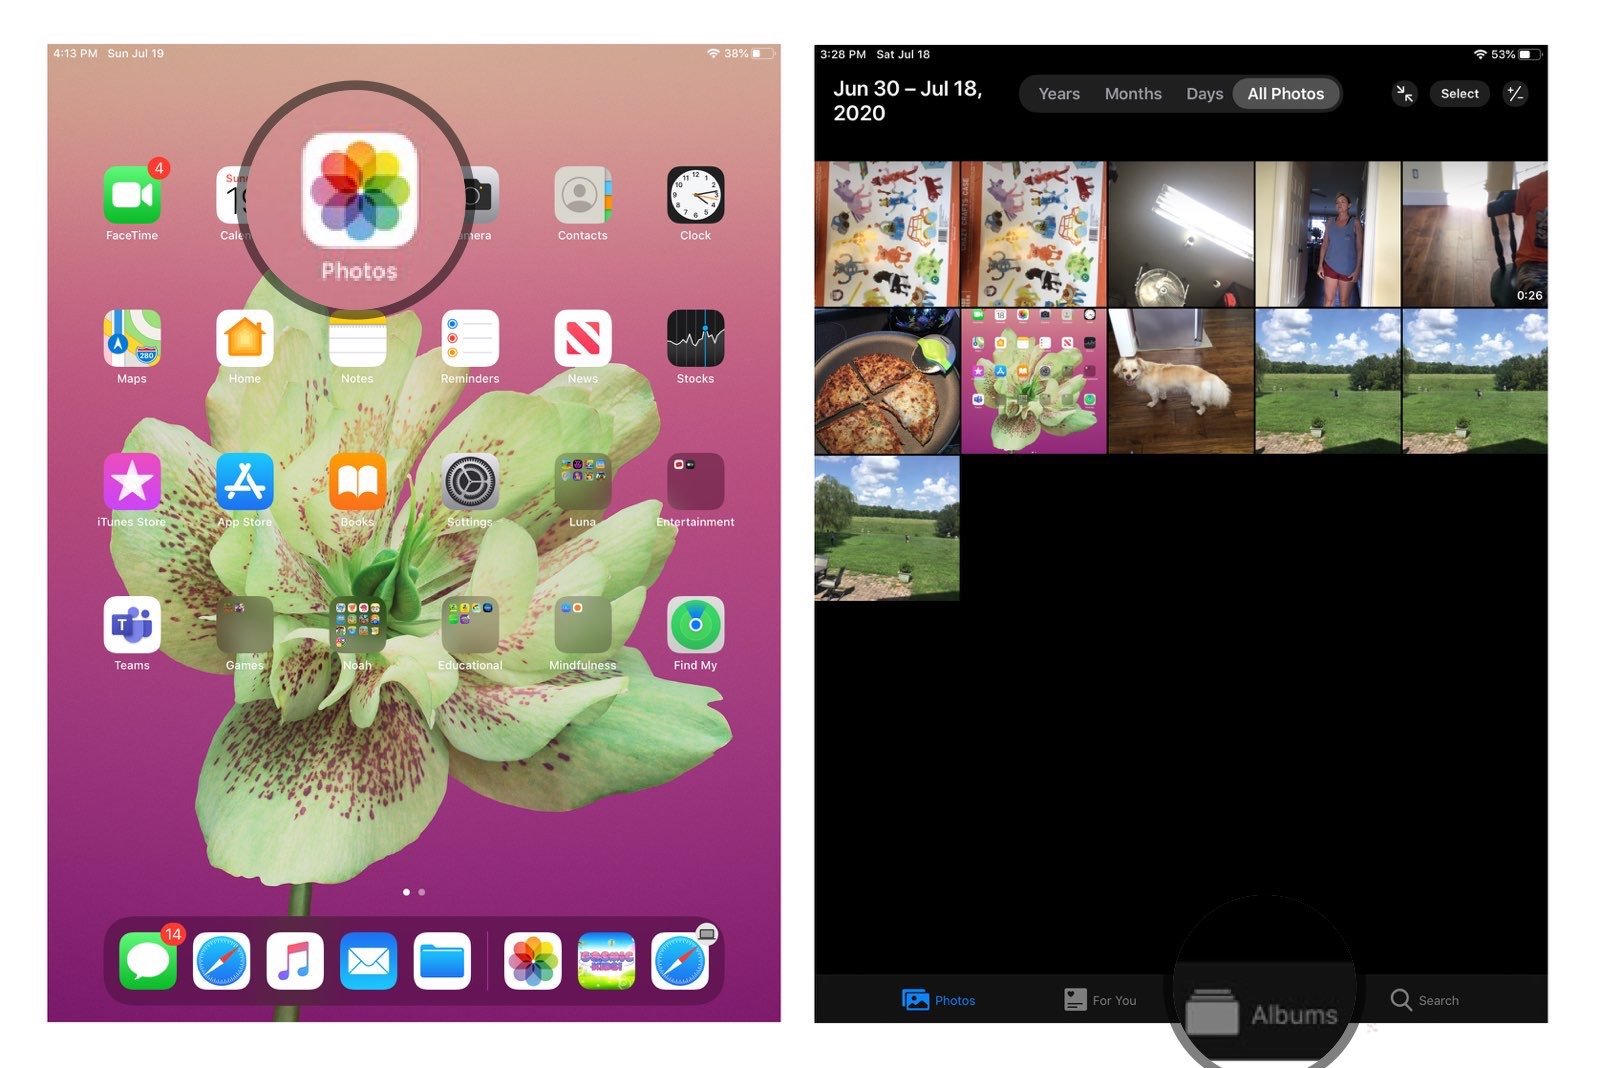 How to add someone: Launch photos app, Tap Albums